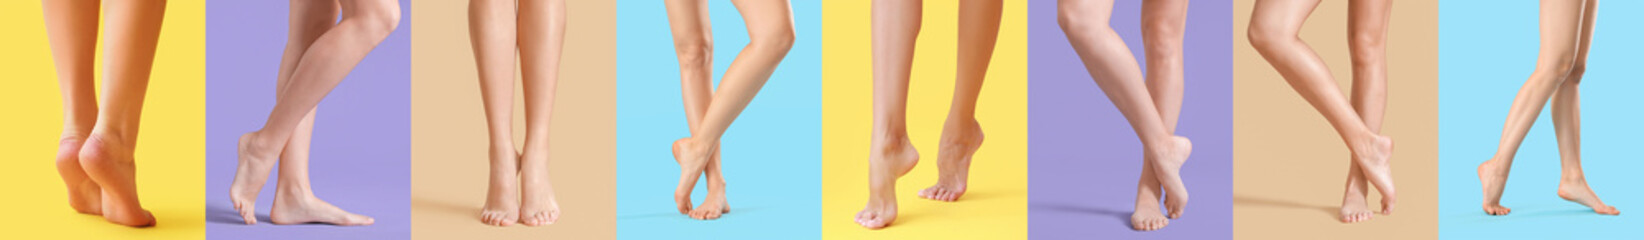 Collage with legs of beautiful barefoot women on colorful background